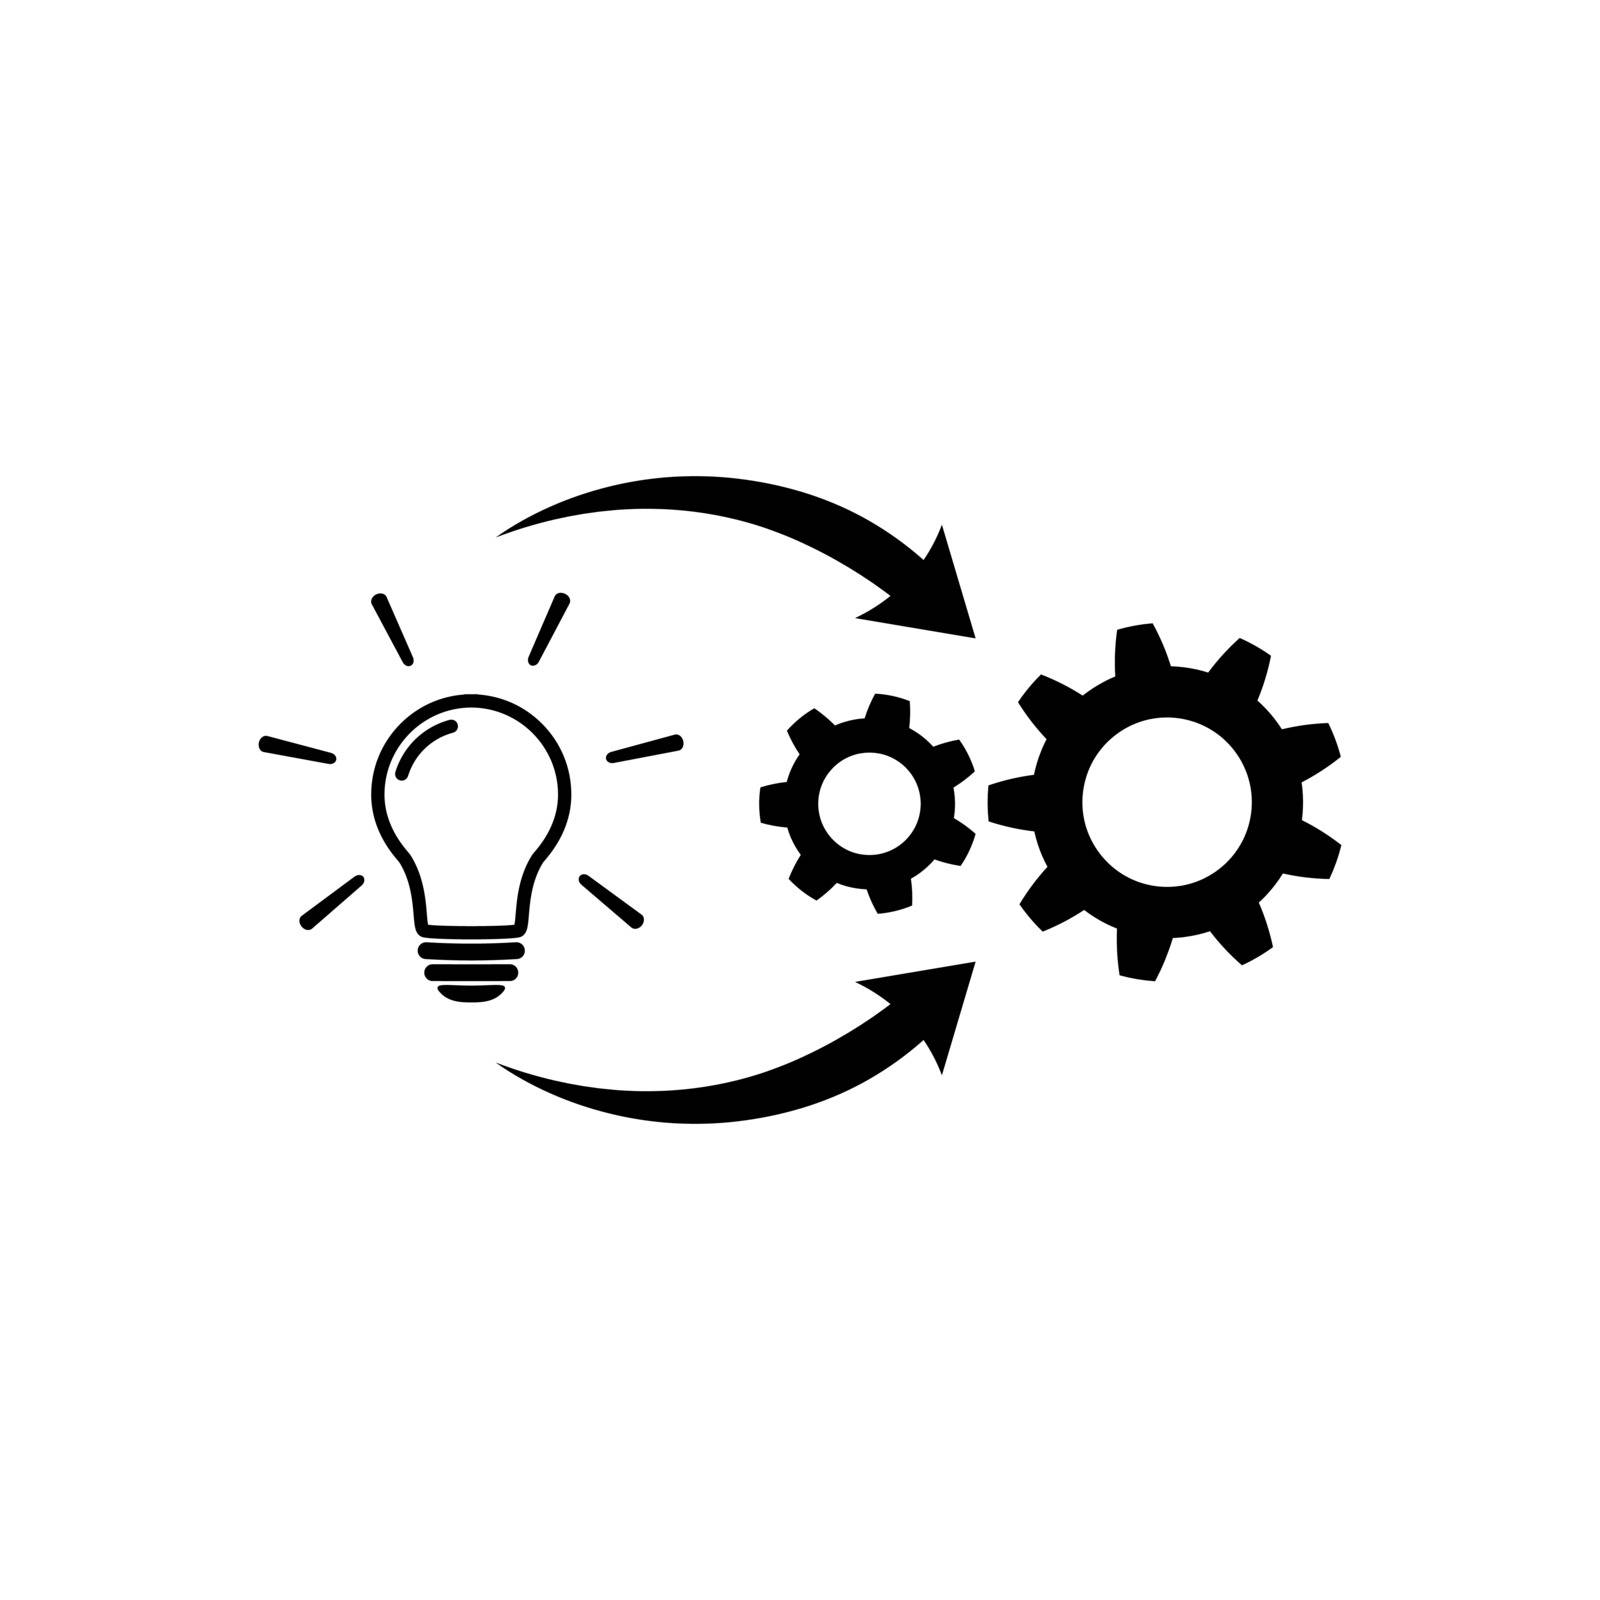 Implementation icon. Light bulb with gear and circulating arrows icon in flat style. Creative cycle symbol isolated on white background Vector illustration for graphic design, Web, UI, mobile upp